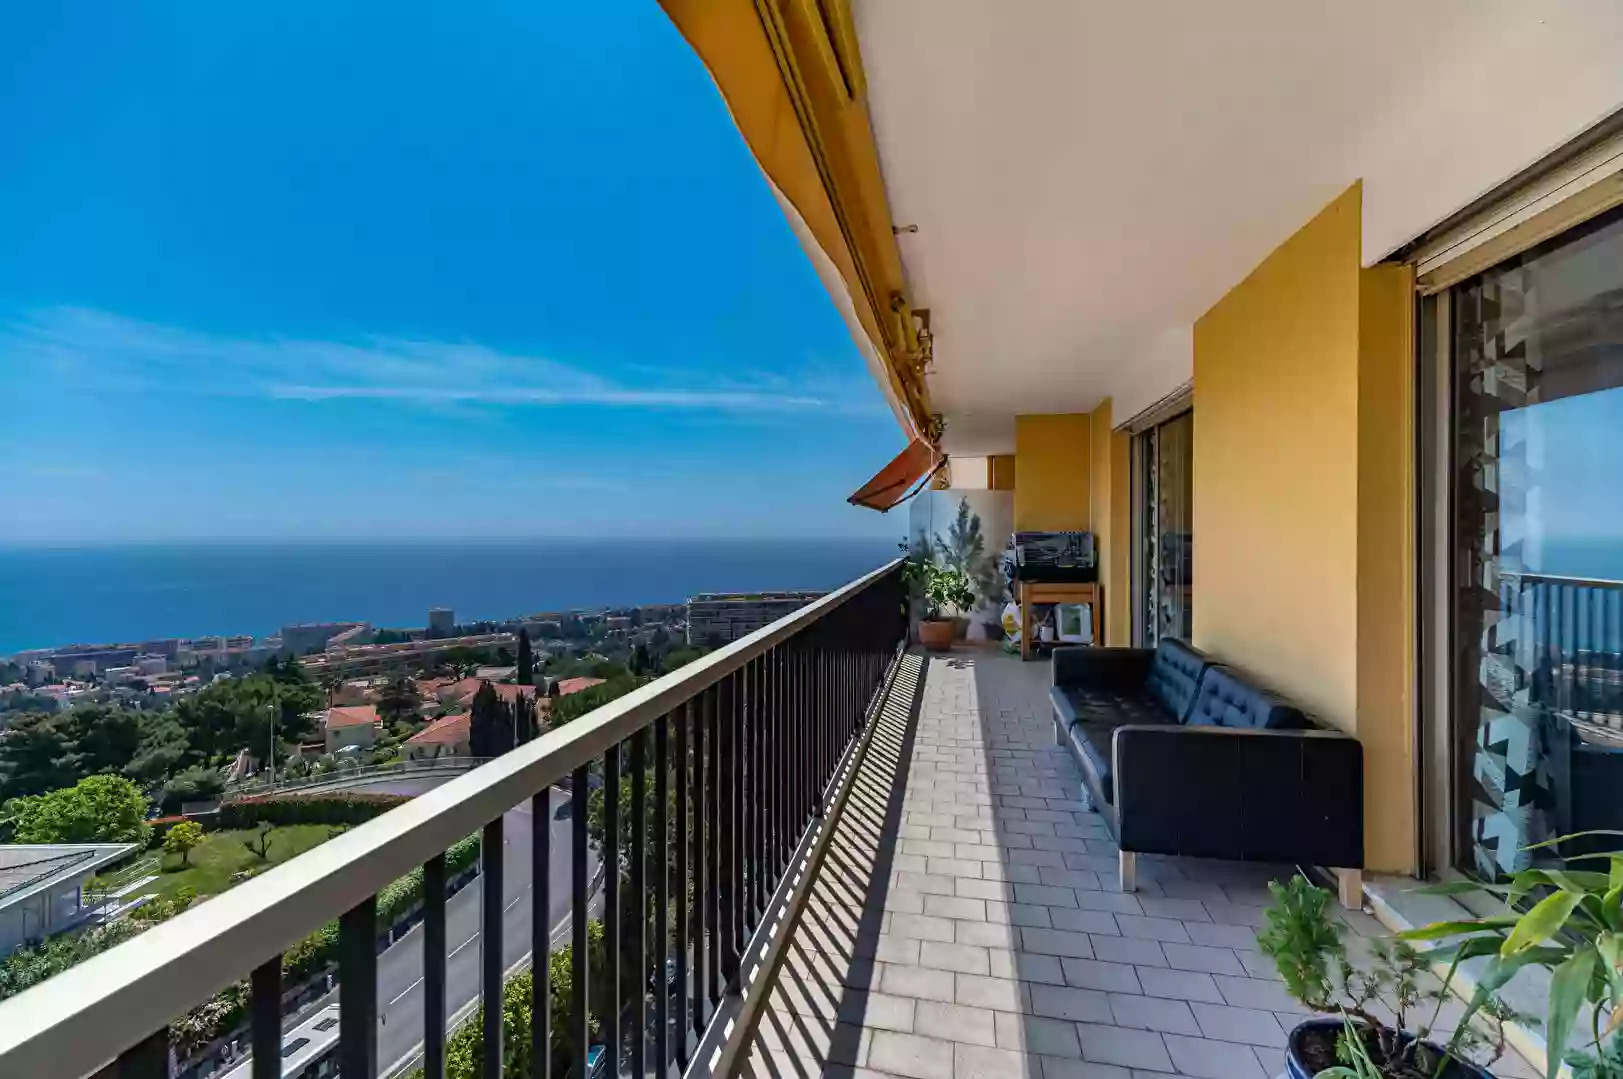 French Cote d'Azur: 3 bedroom duplex for sale in the heart of Nice